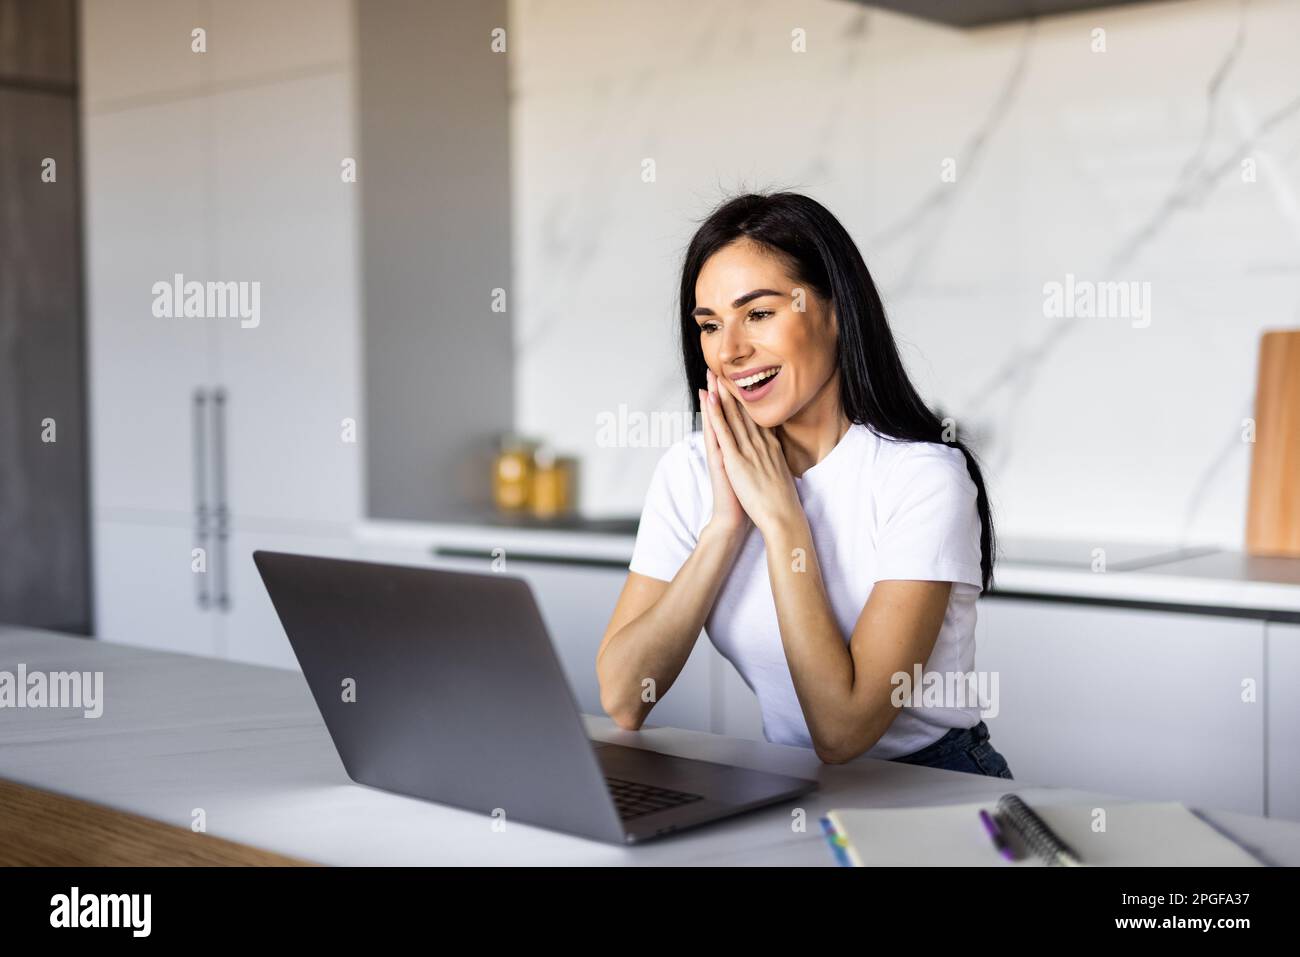 Cute smiling woman using laptop at home. Student girl working on computer. Stock Photo